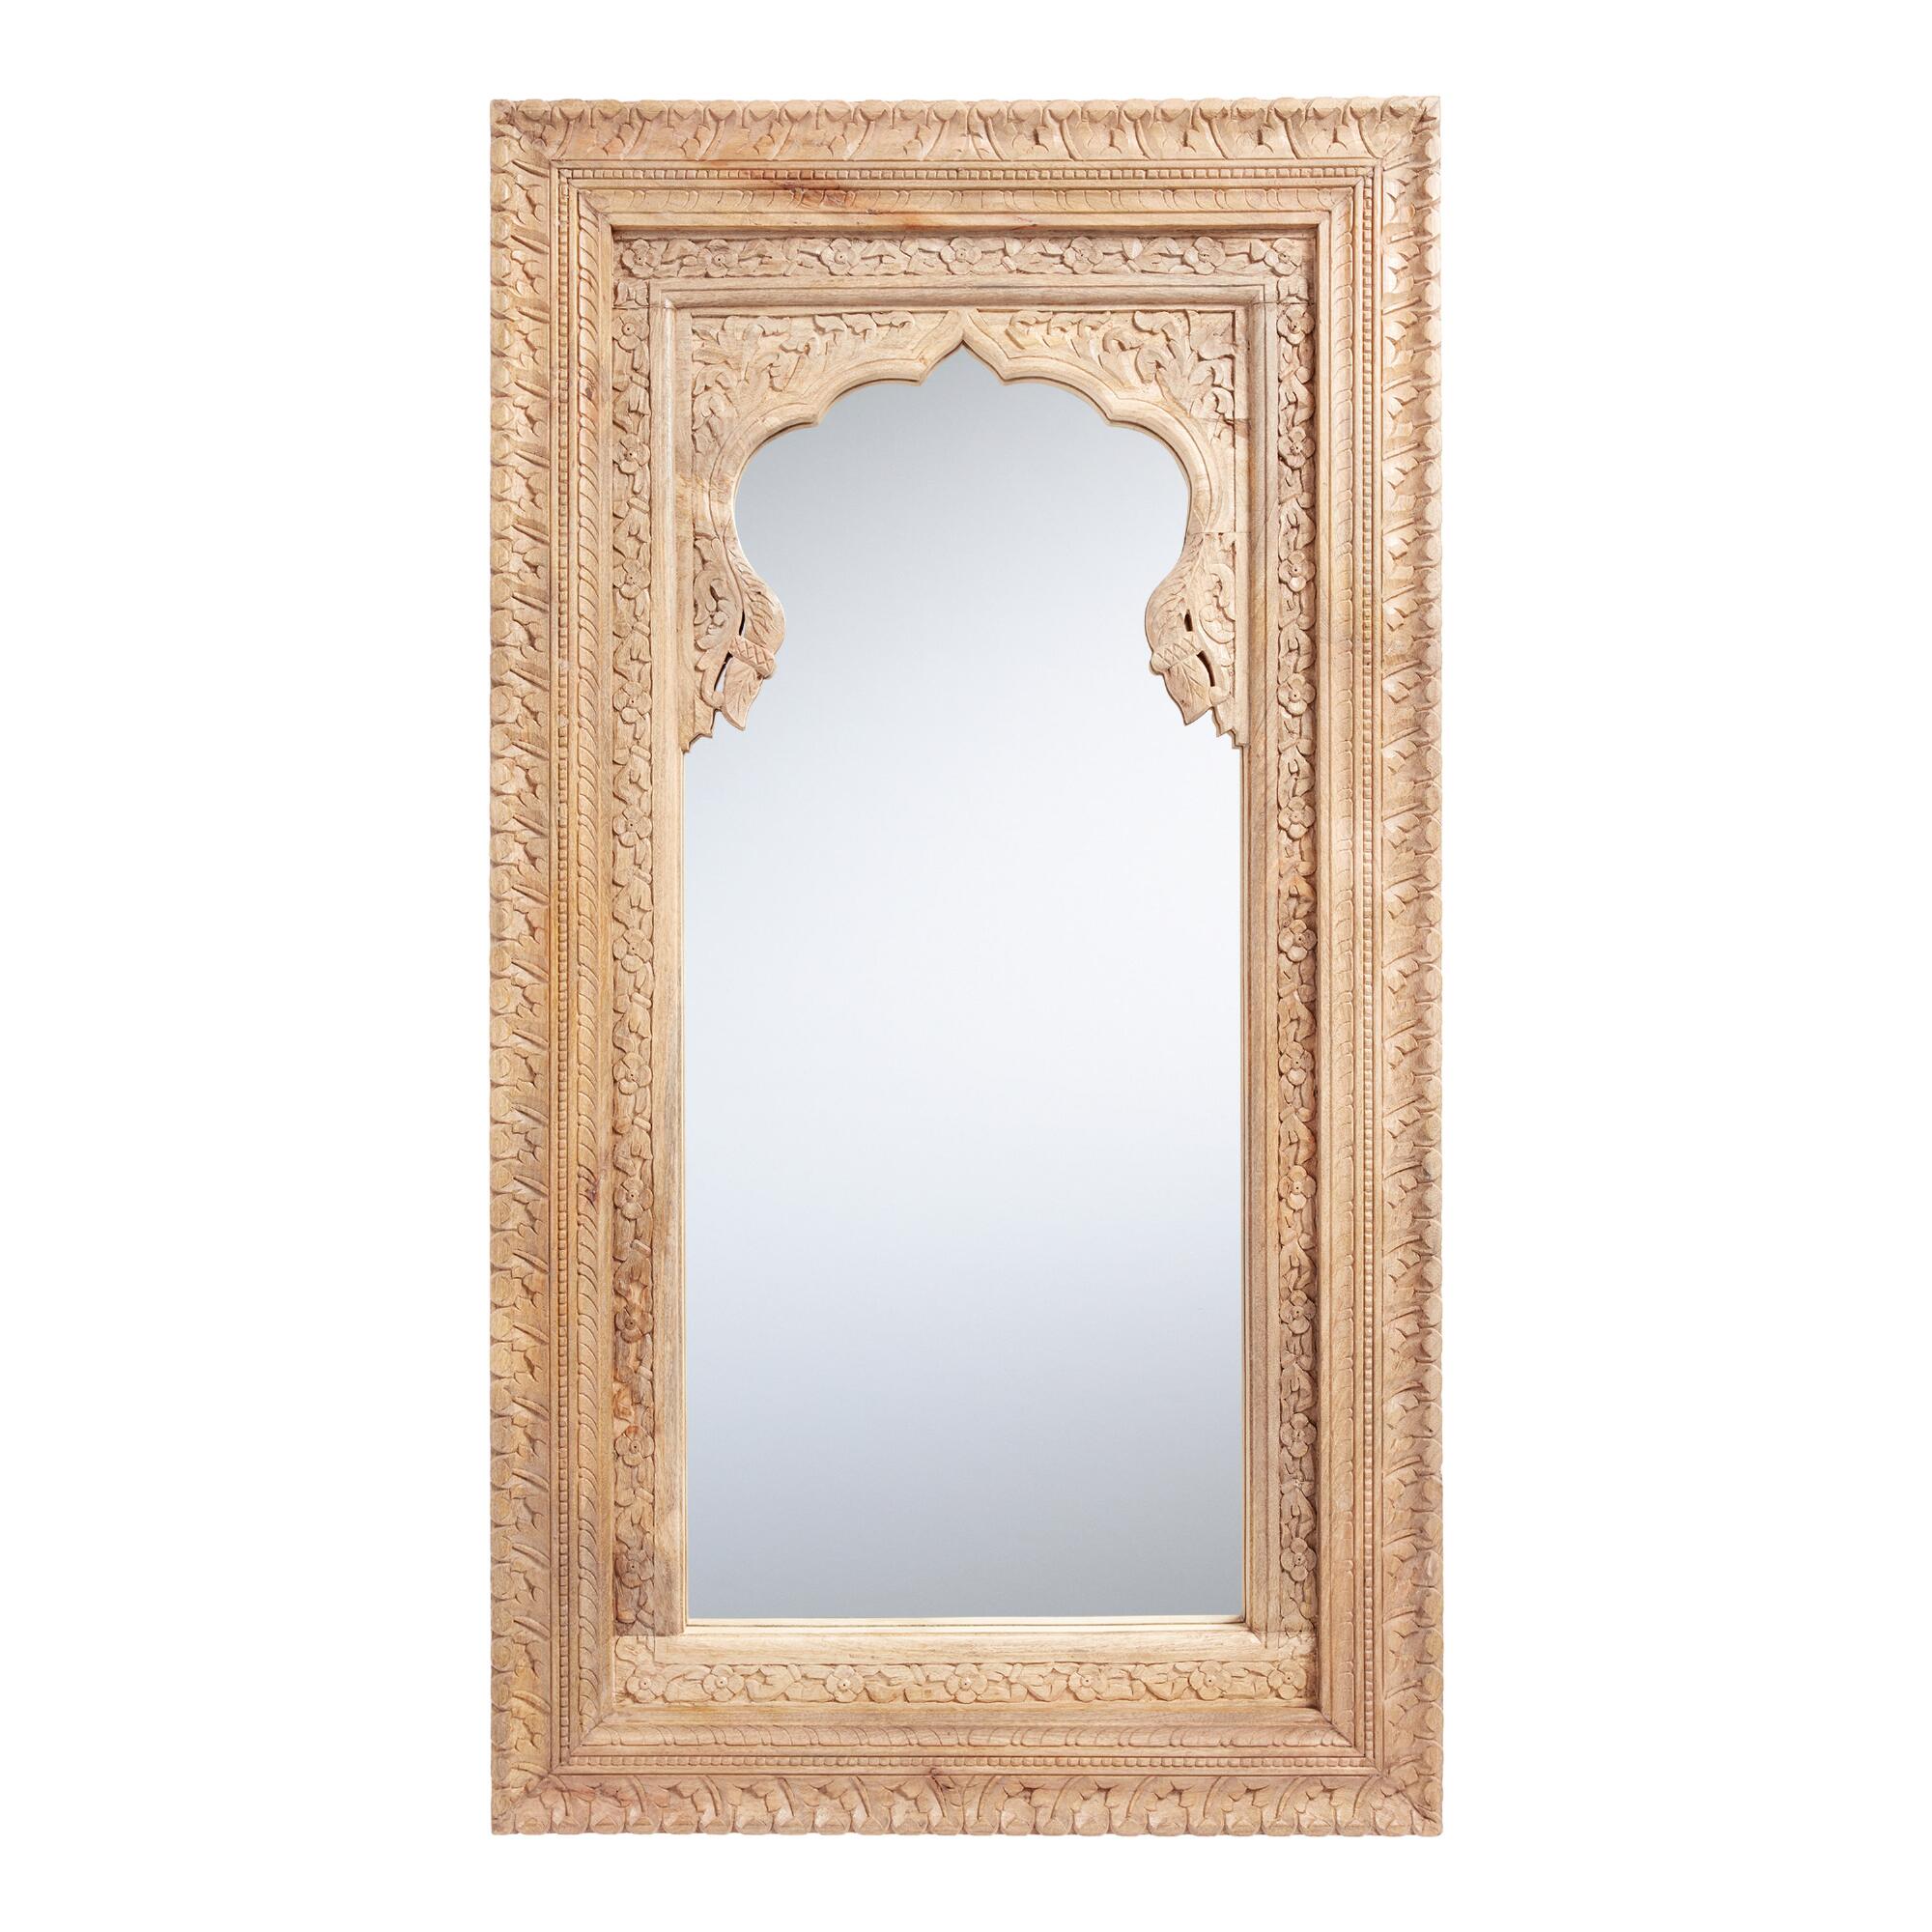 Large Natural Carved Wood Full Length Mirror by World Market